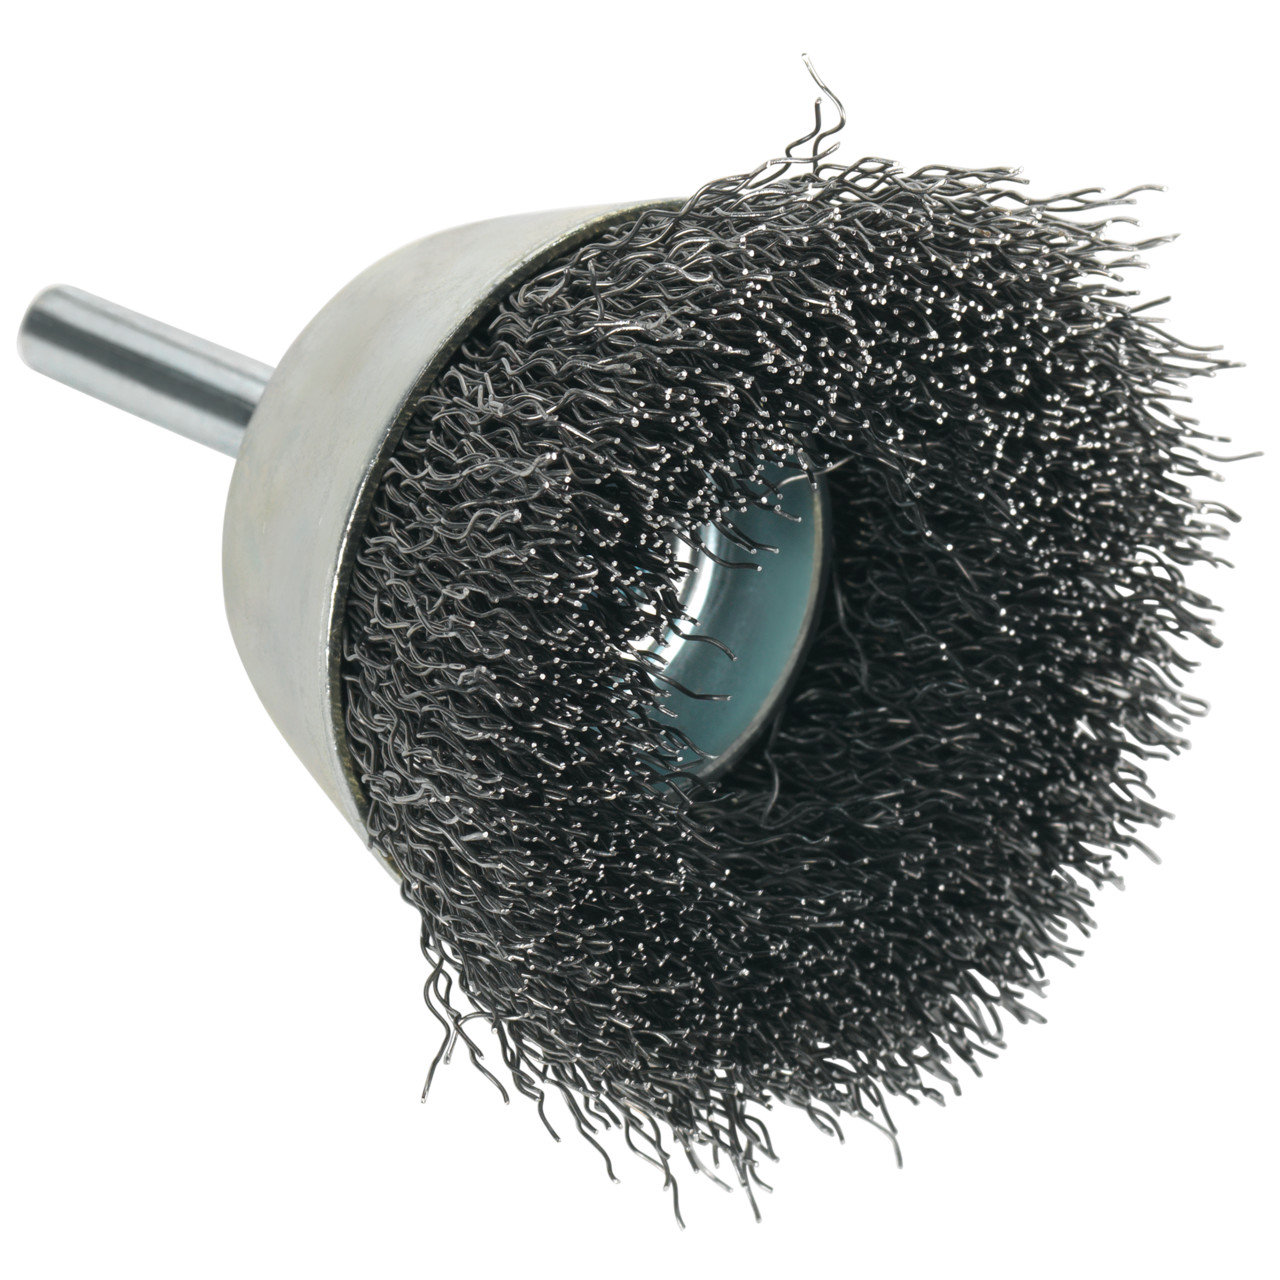 TYROLIT Cup brushes DxLxH-GExI 70x15x25-6x30 For steel, shape: 52TDW - (cup brushes), Art. 890774